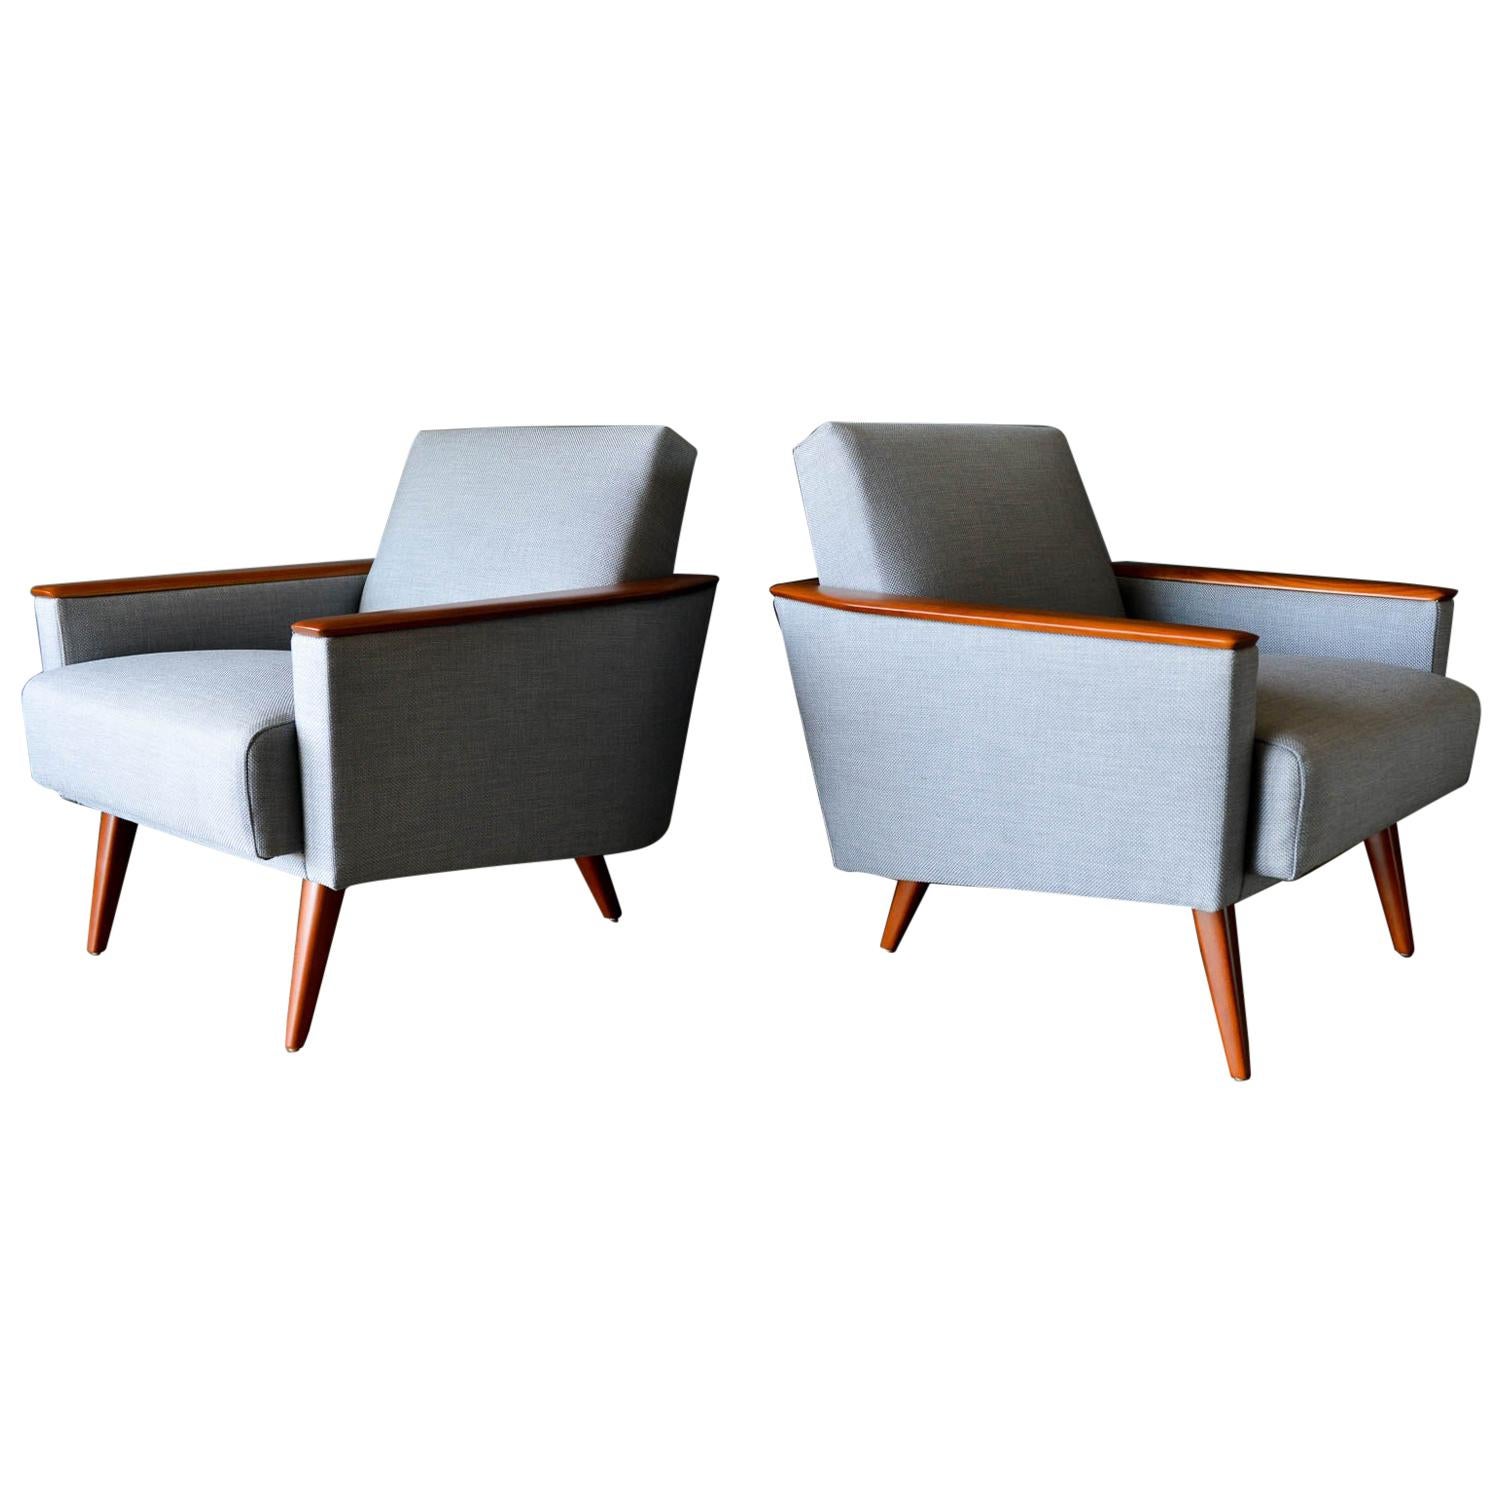 Pair of Mid-Century Modern Wood Framed Lounge Chairs, circa 1960